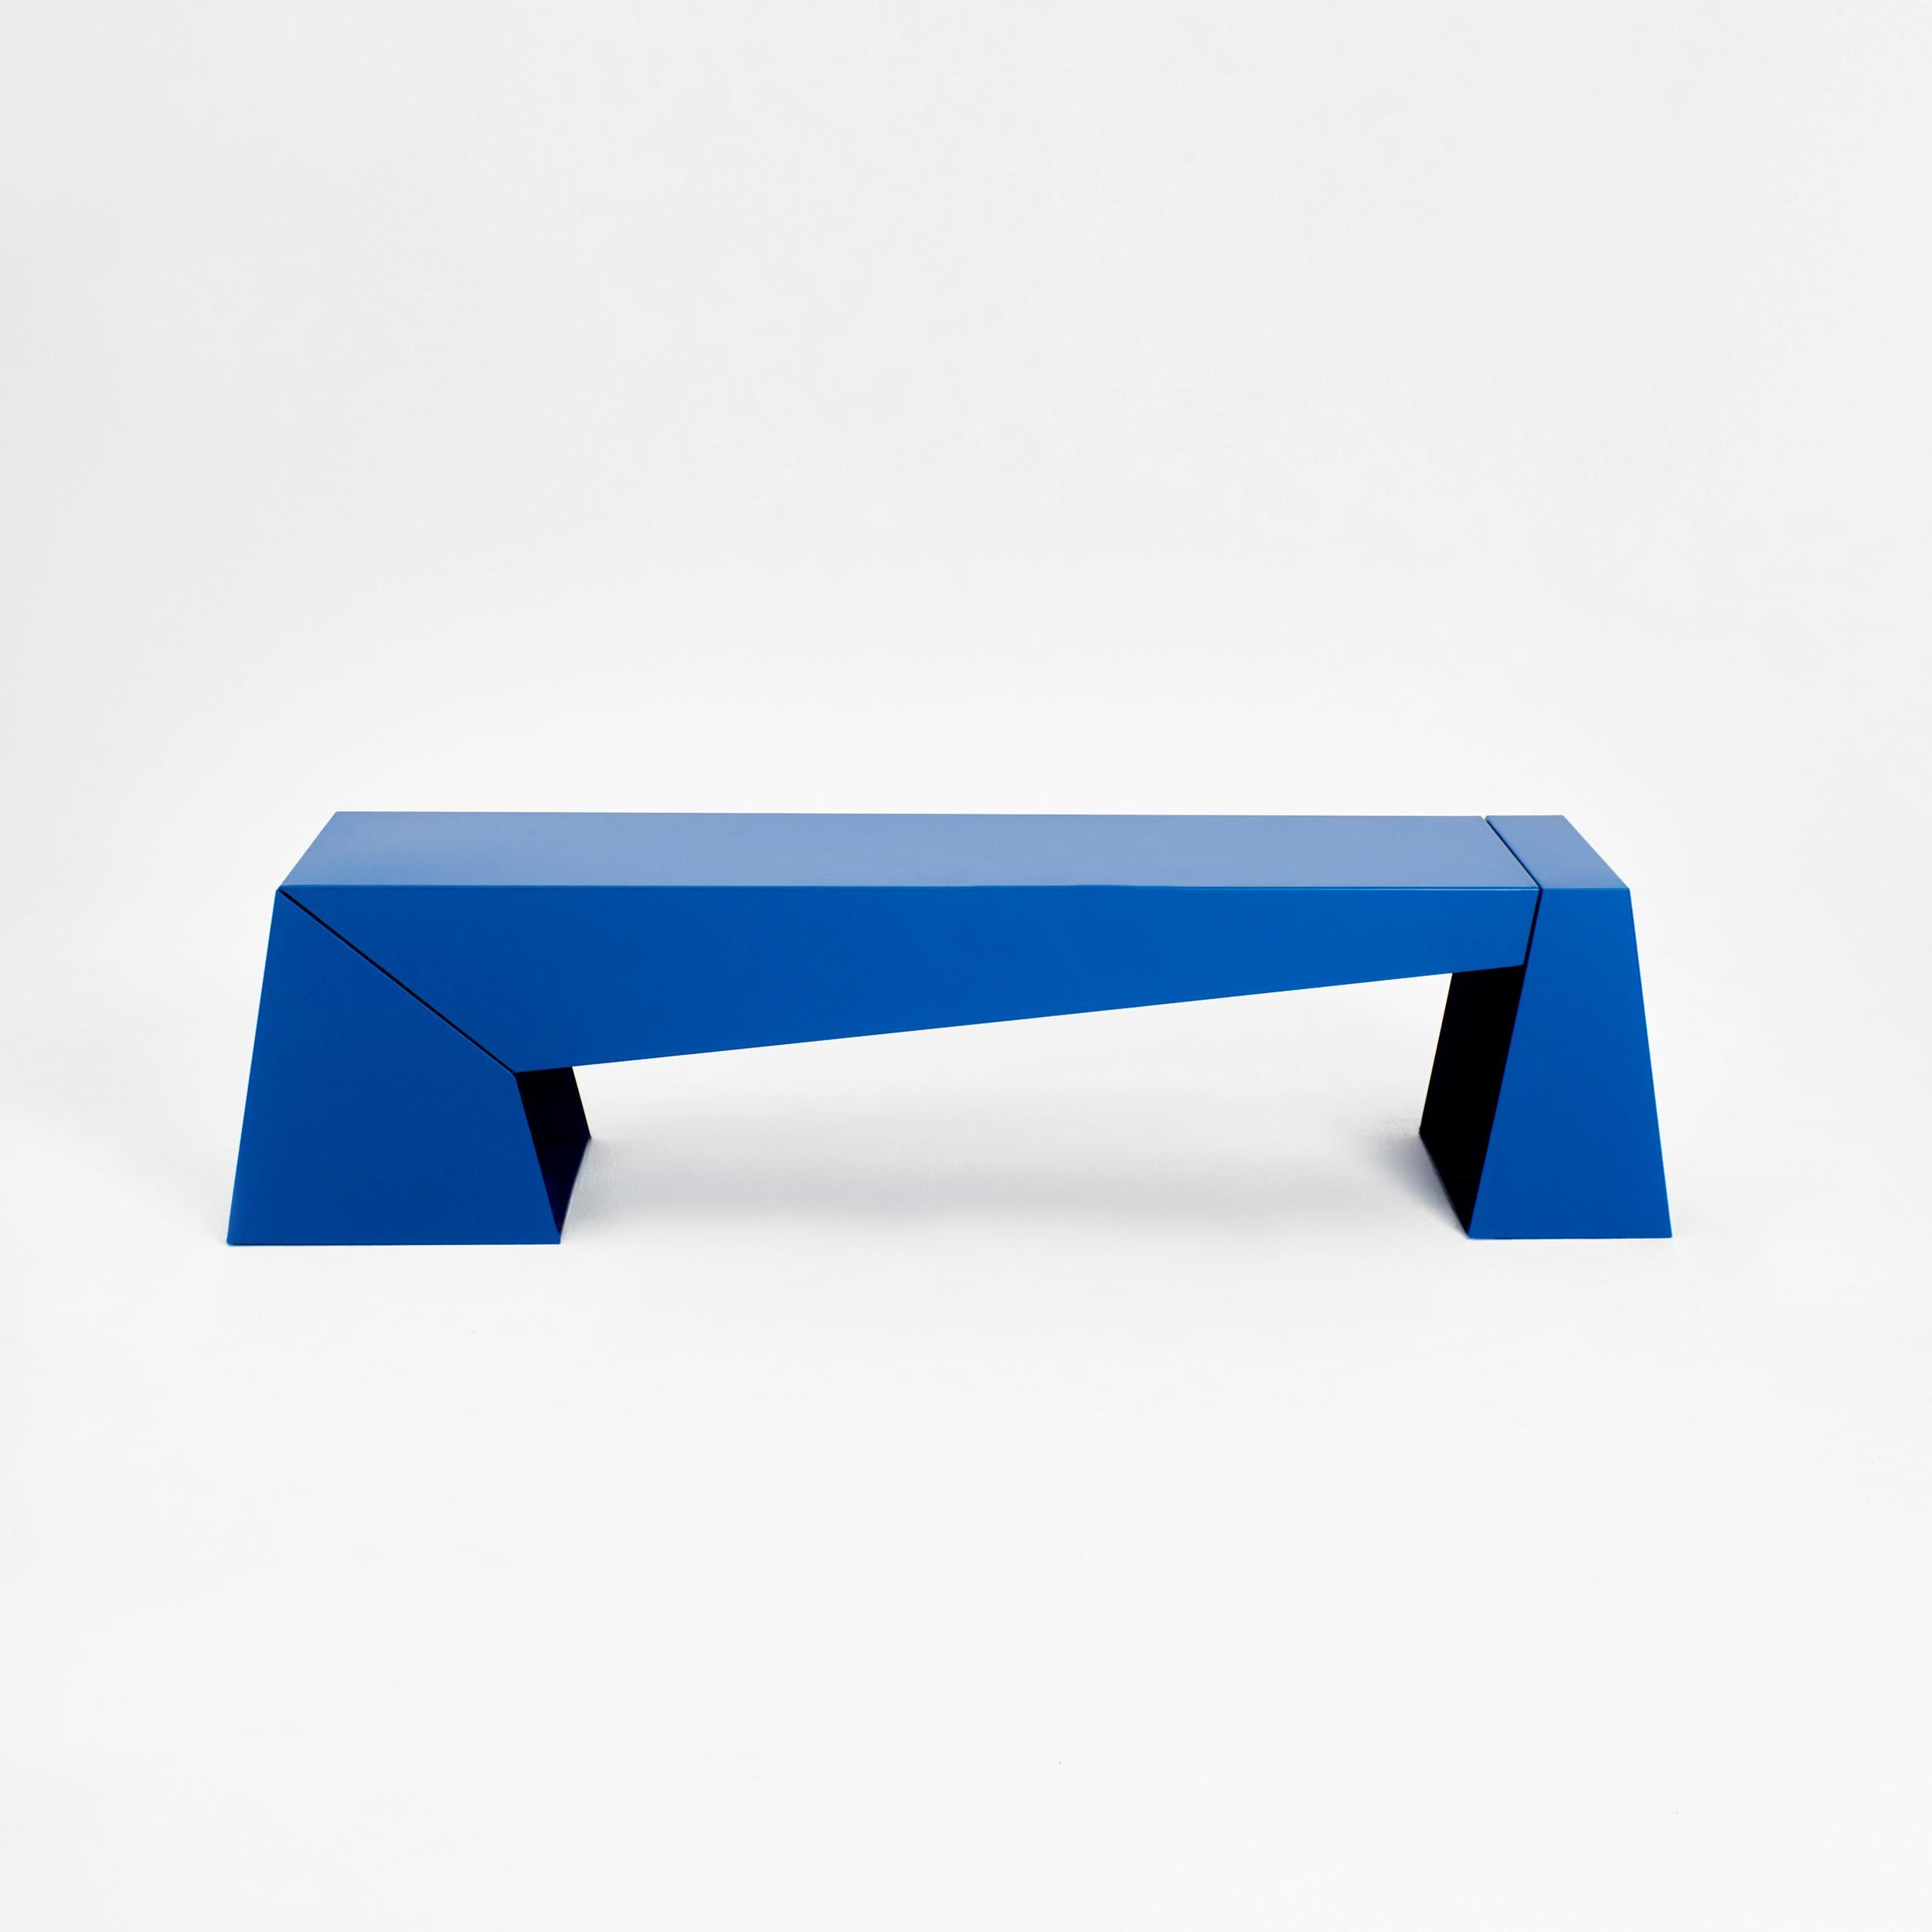 Outdoor Folded bench by Project 213A
Dimensions: D 45 x W 178 x H 44 cm
Materials: Metal.

Three pieces of steel folded together and joined through metal elements, and powder coated. The asymmetric finish of the bench with small gaps between each